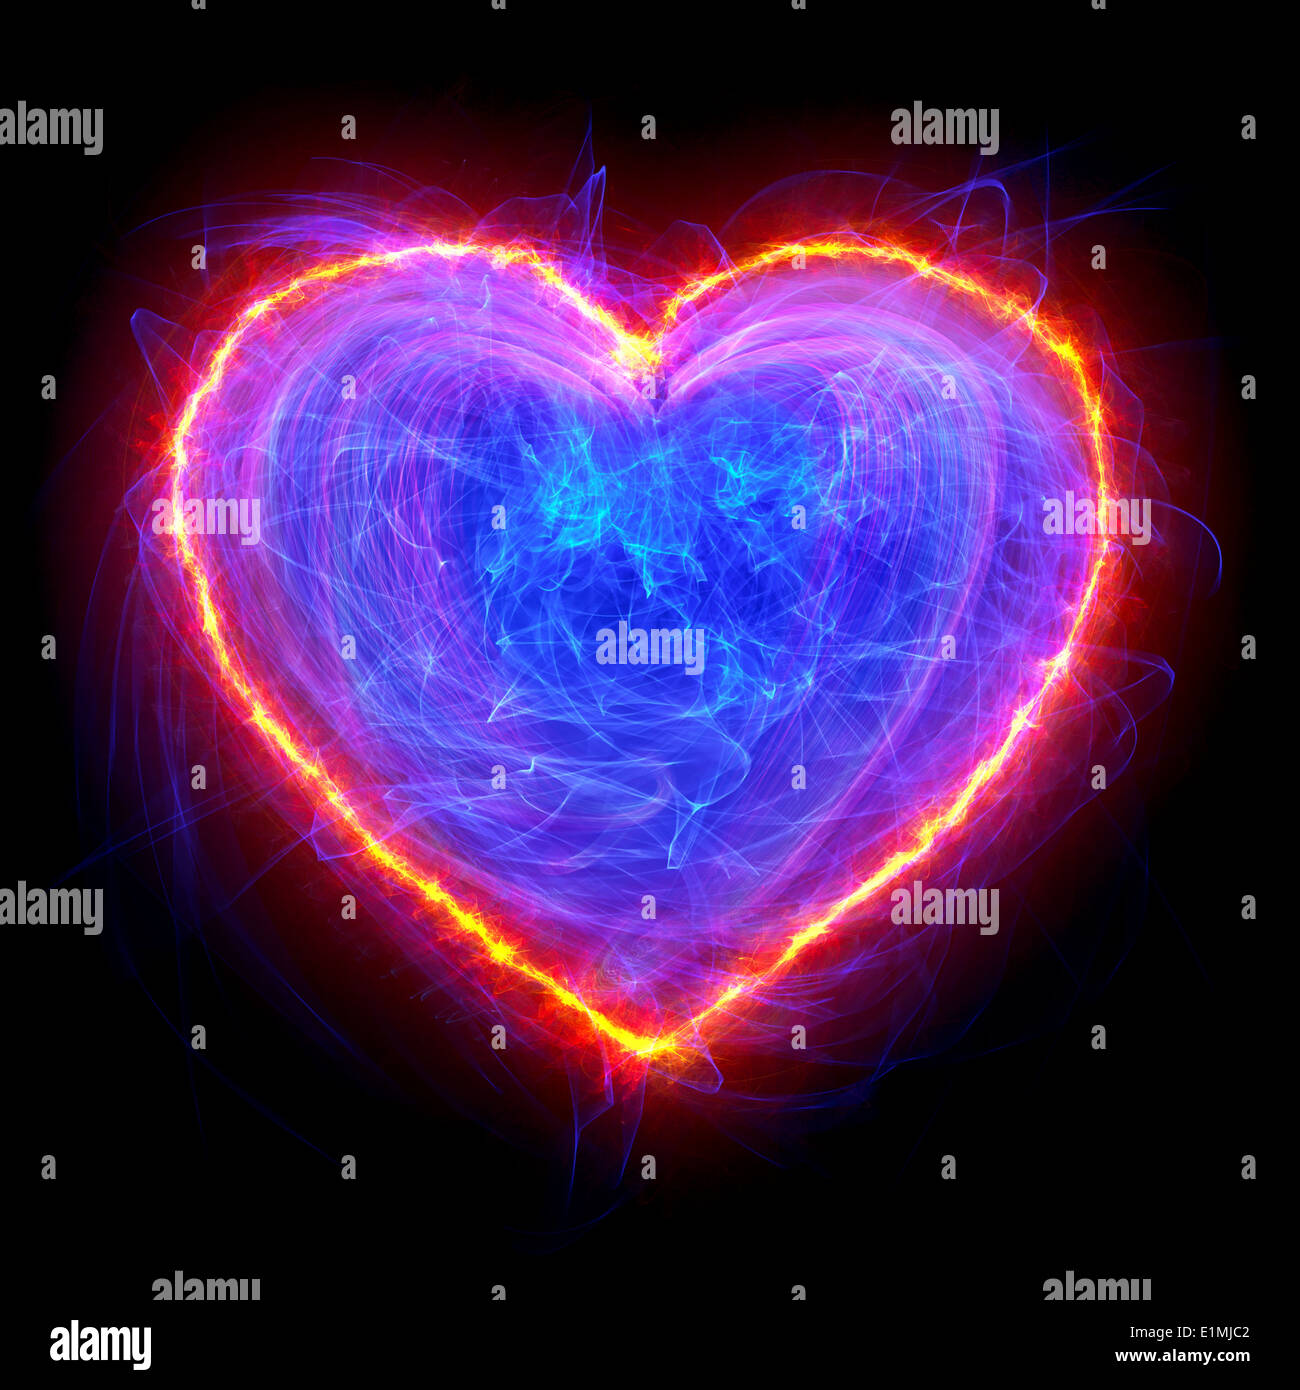 Heart shape energy abstract. On black background. Stock Photo